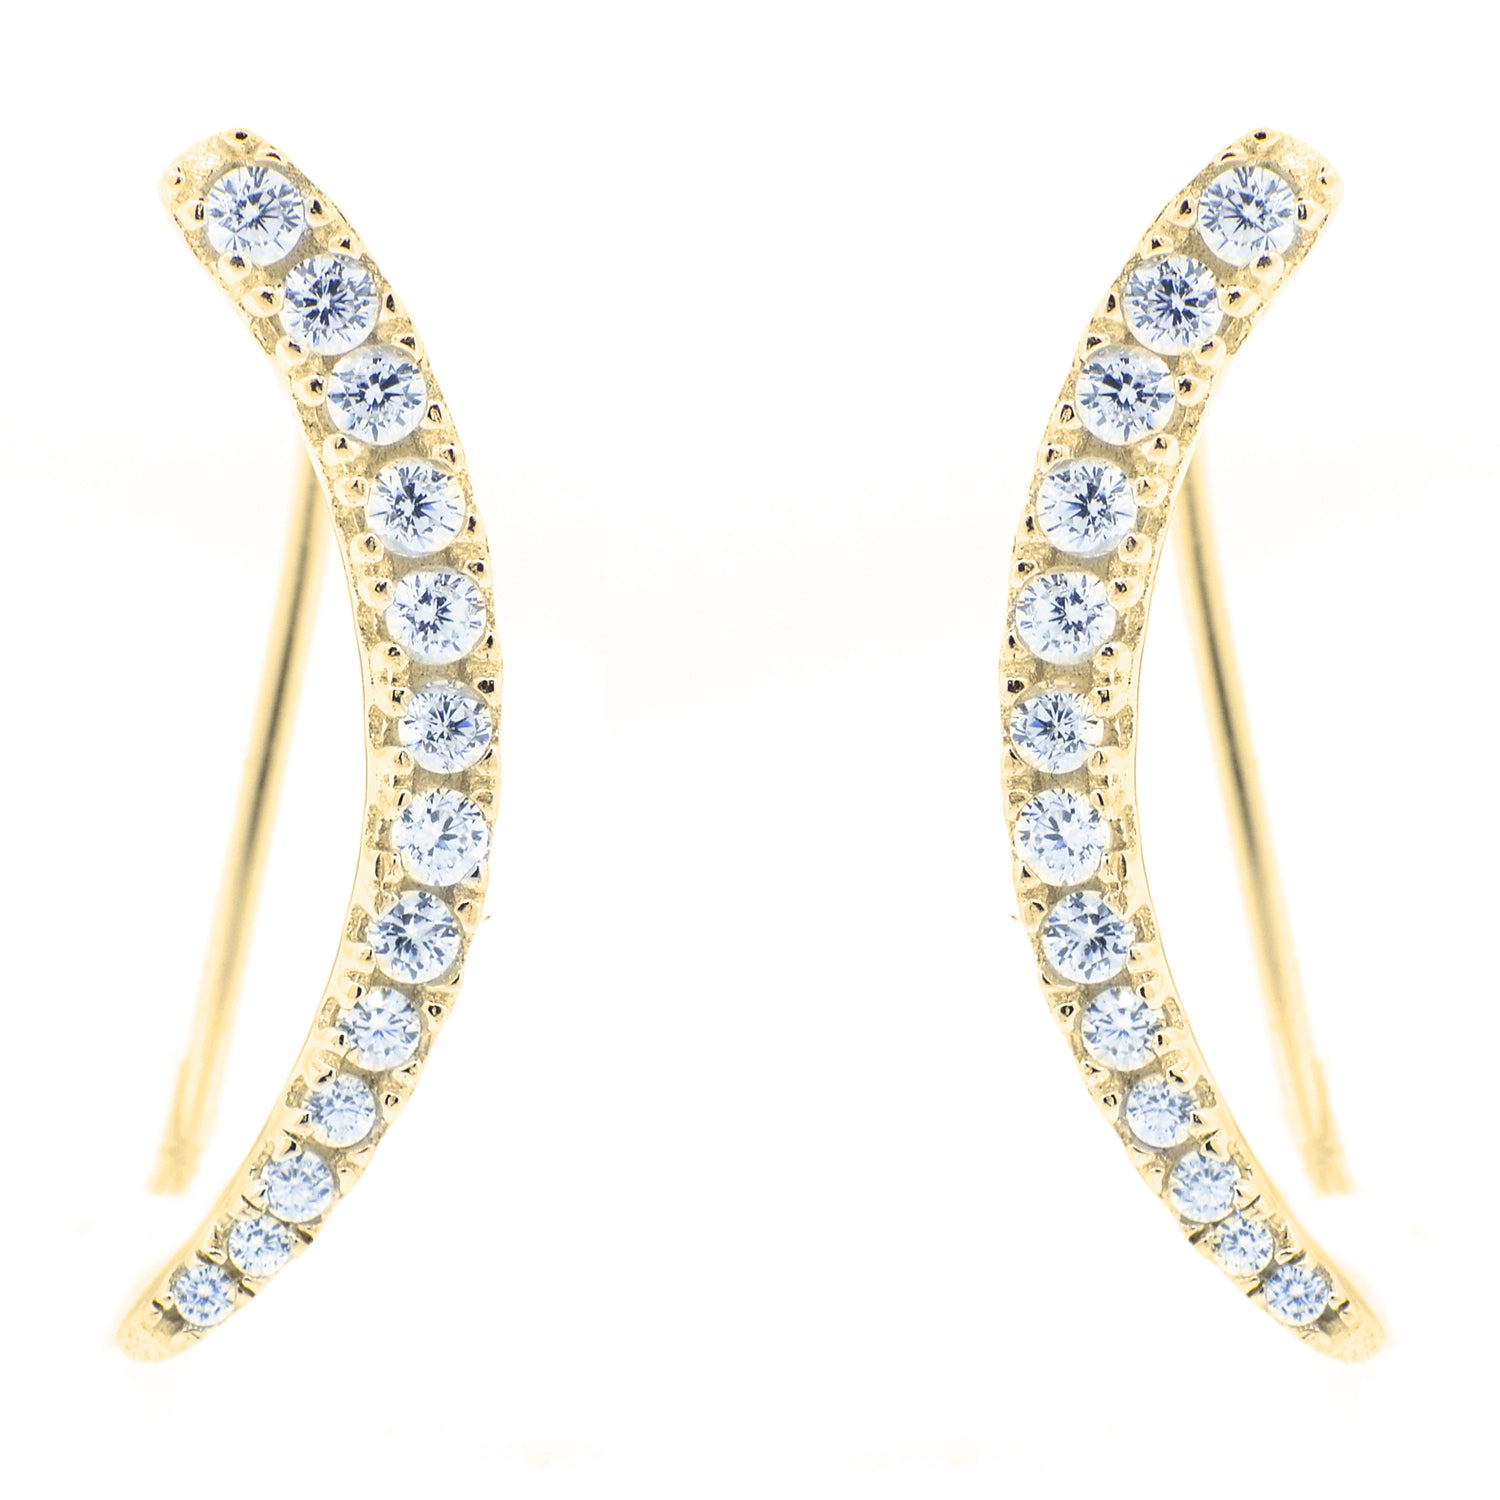 Camila Sterling Silver Yellow Gold Plated Ear Climber Earrings